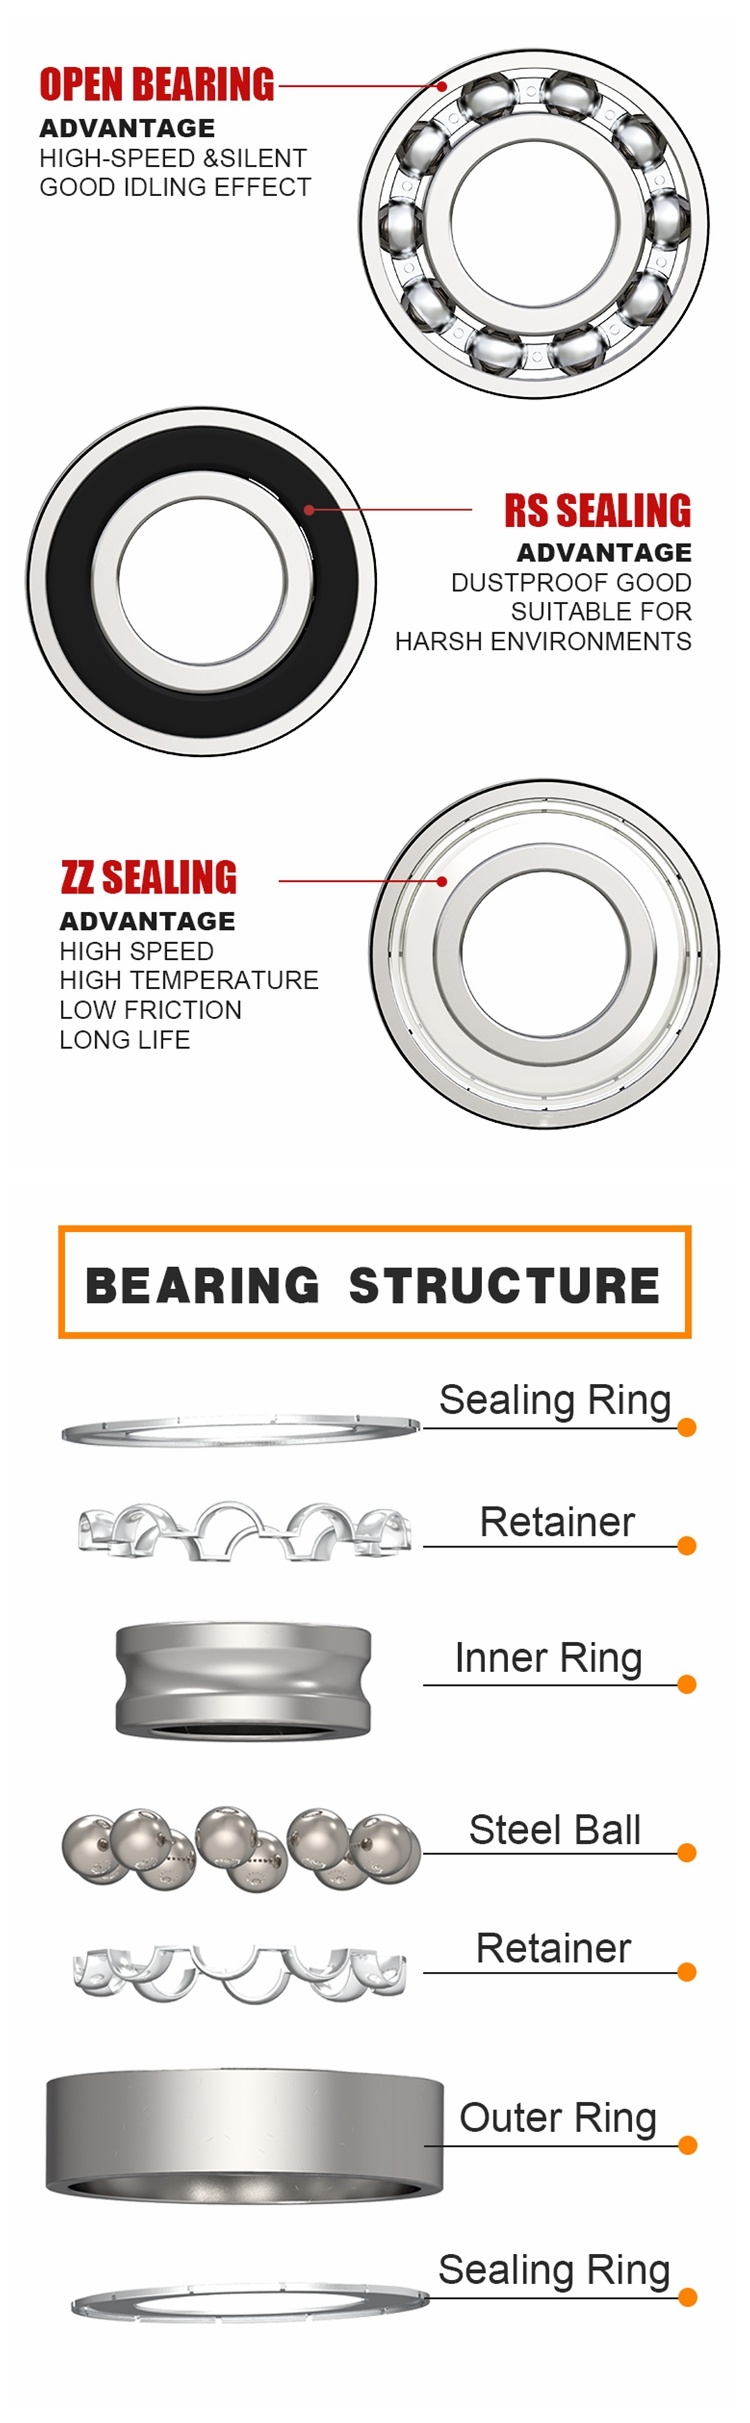 ABEC-3 Motorcycle Bearing Rubber Cover 6911 Zz Ball Bearings